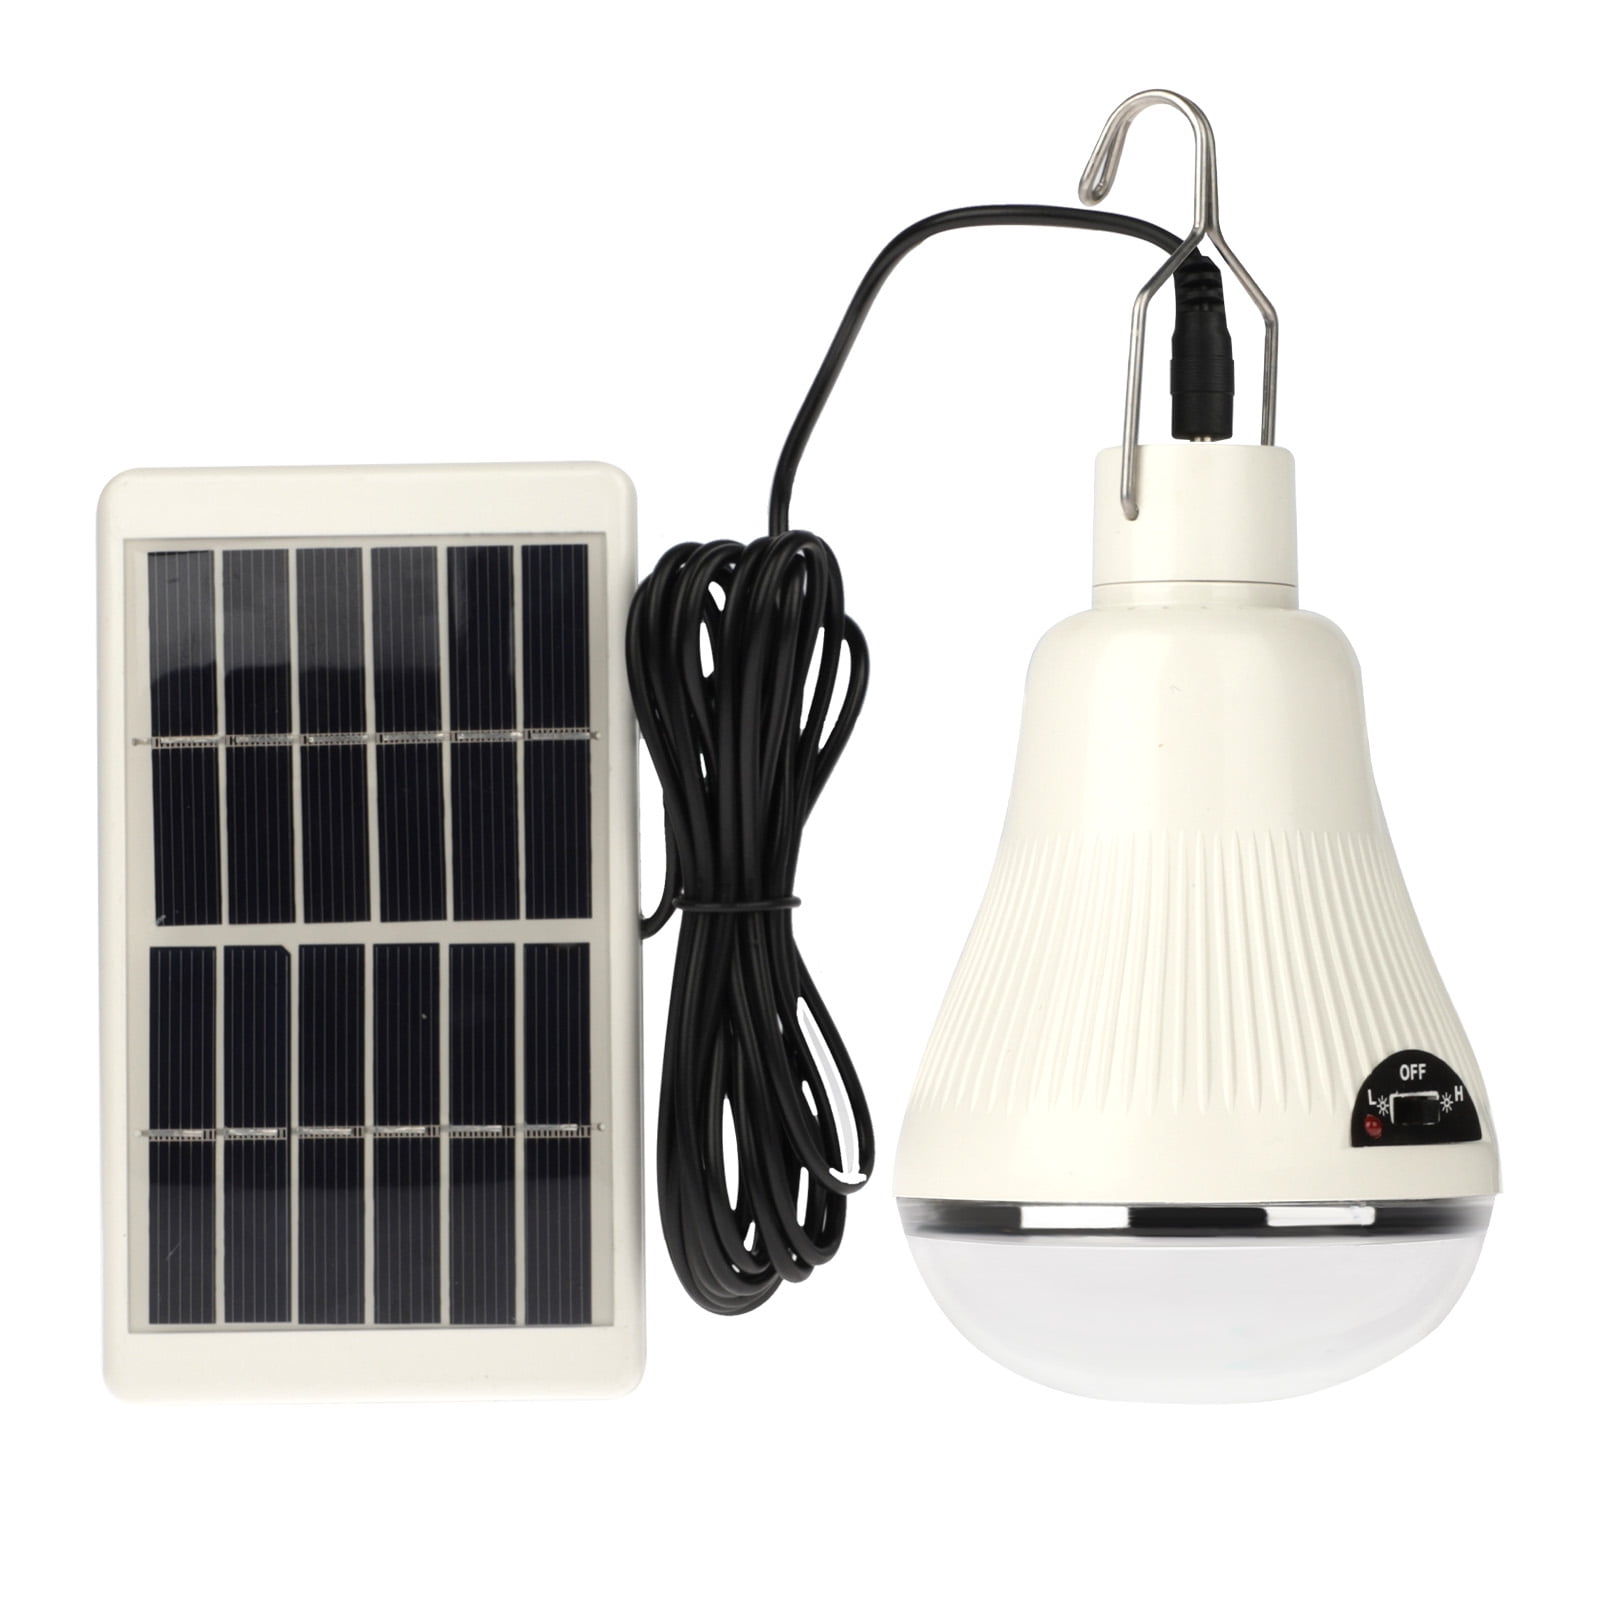 Details about   2x Remote Solar Power Light Bulb Shed Lamp Chicken Coops Garden Lighting 